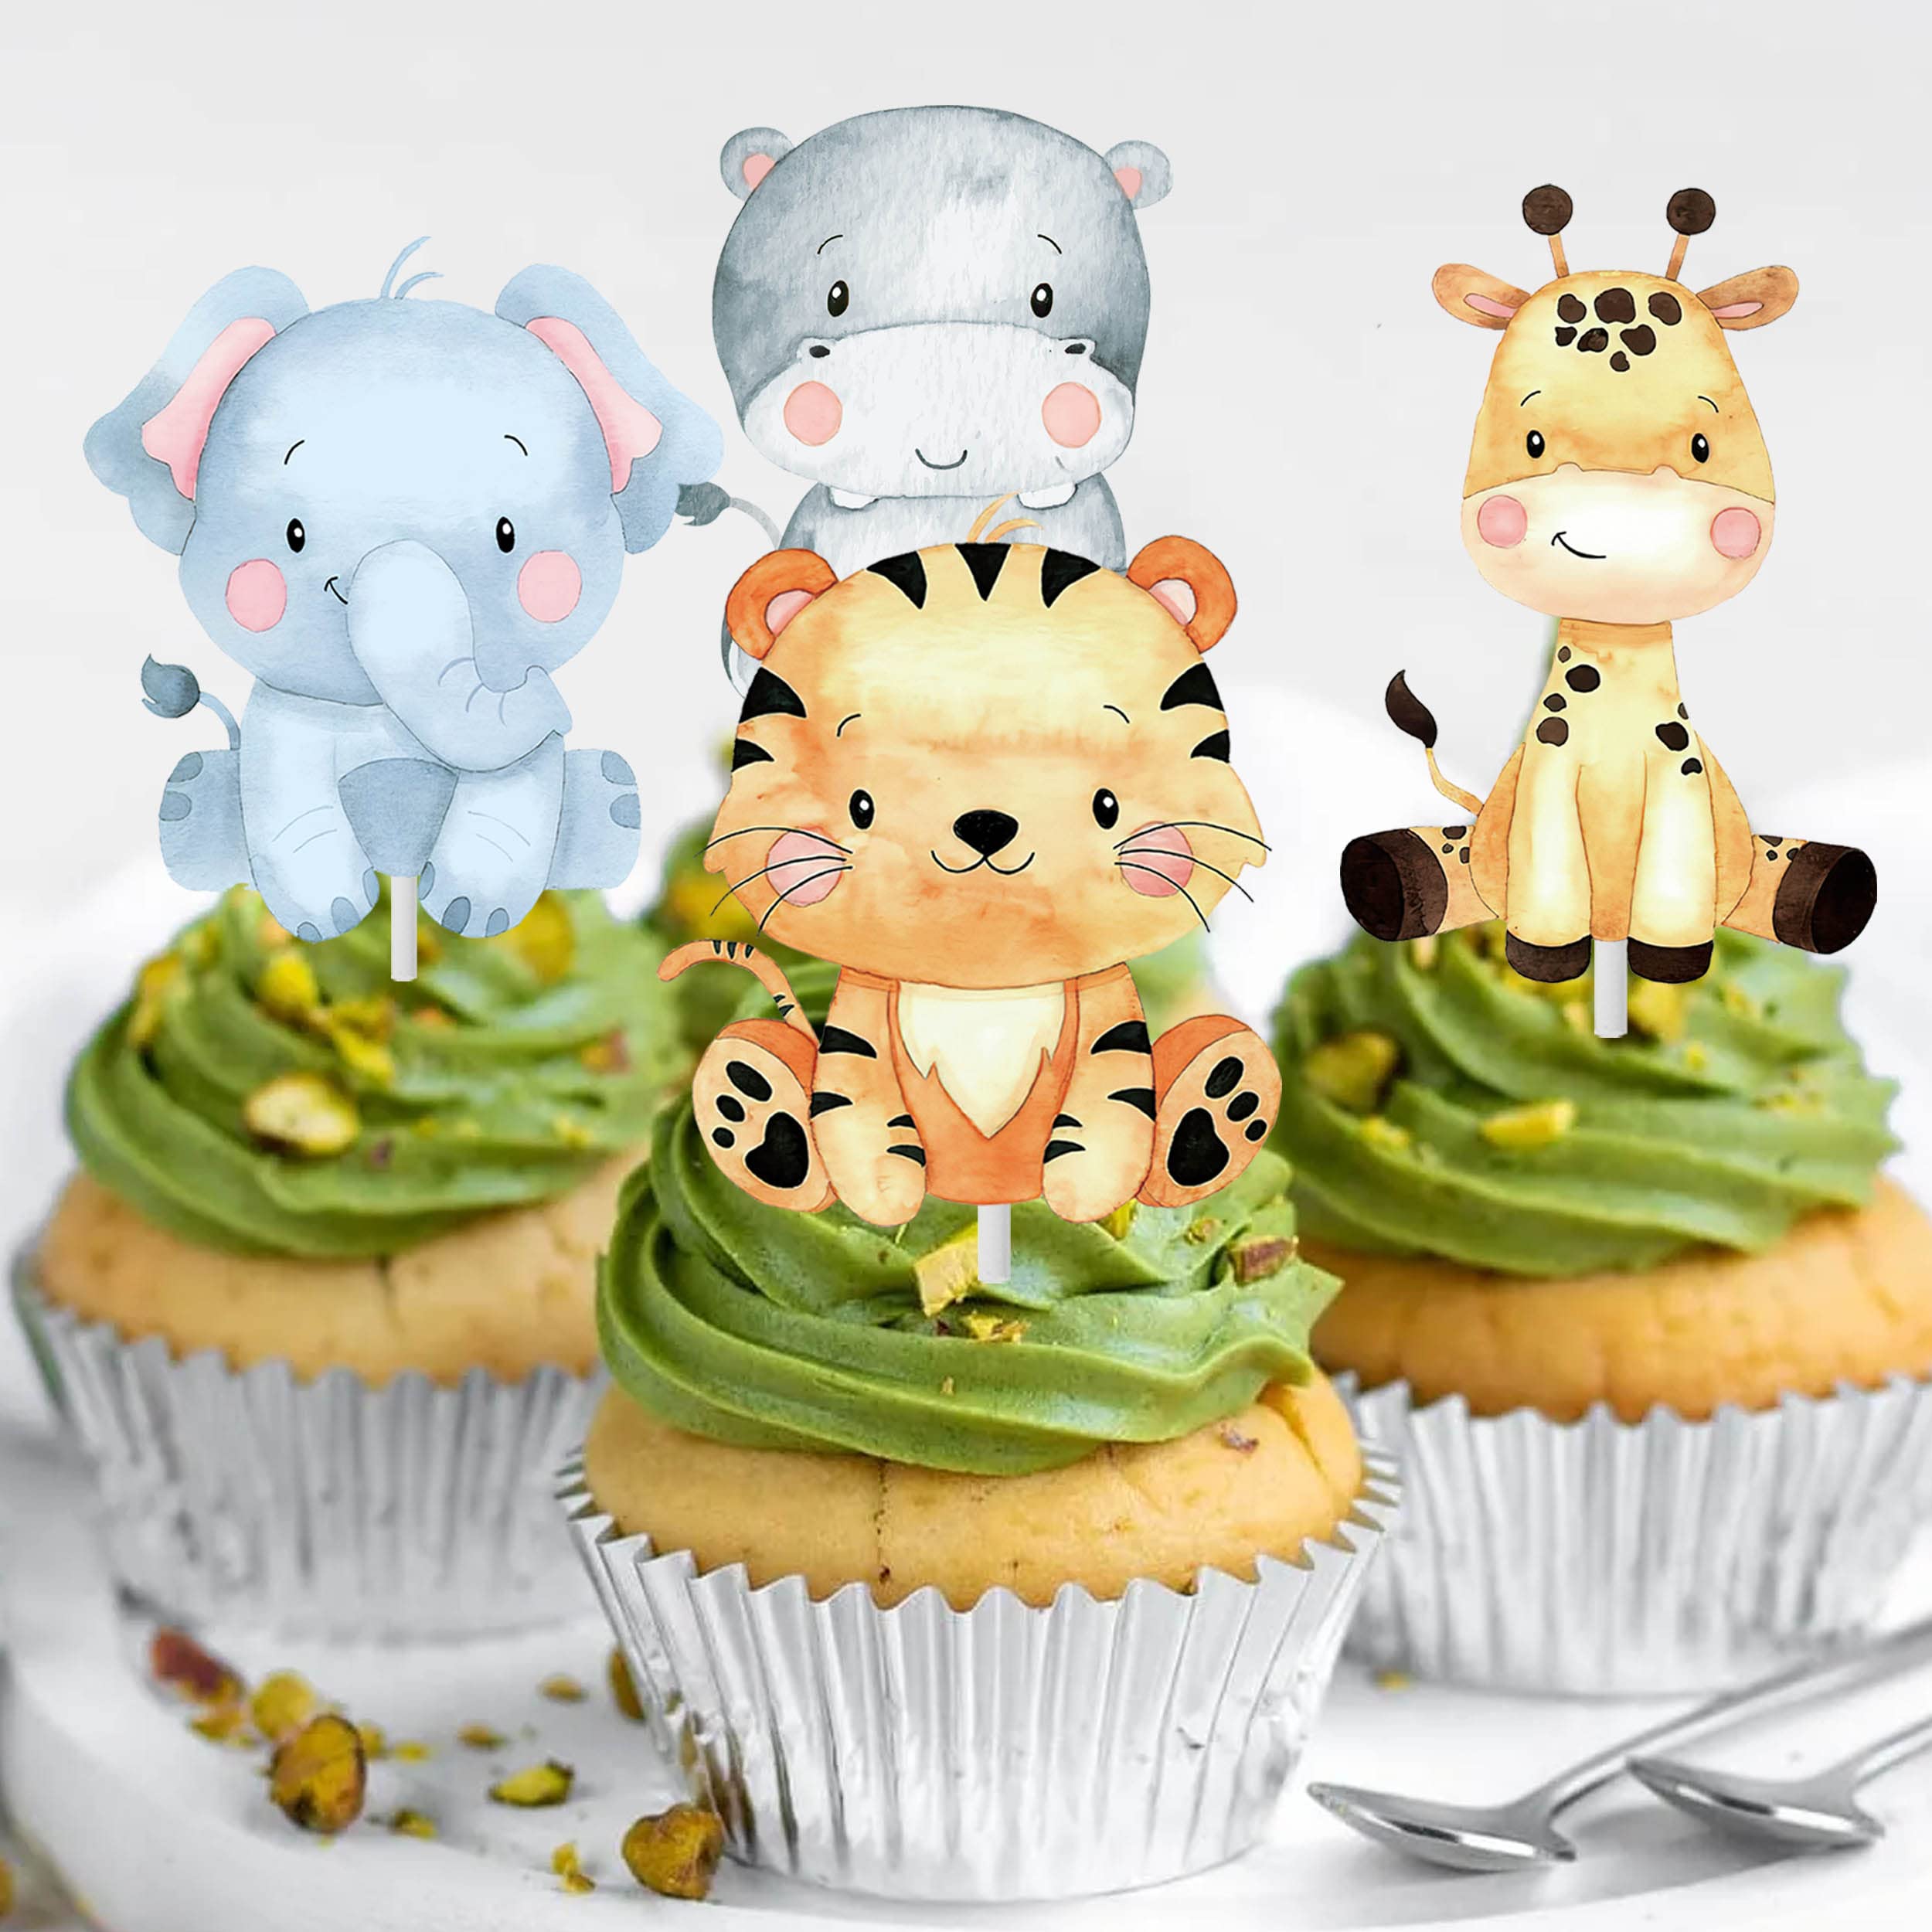 24pcs Jungle Animals Party Cupcake Toppers Decorations Jungle Safari Animal Theme Party Supplies for Zoo Wild Animal Birthday Party Baby Shower Supplies